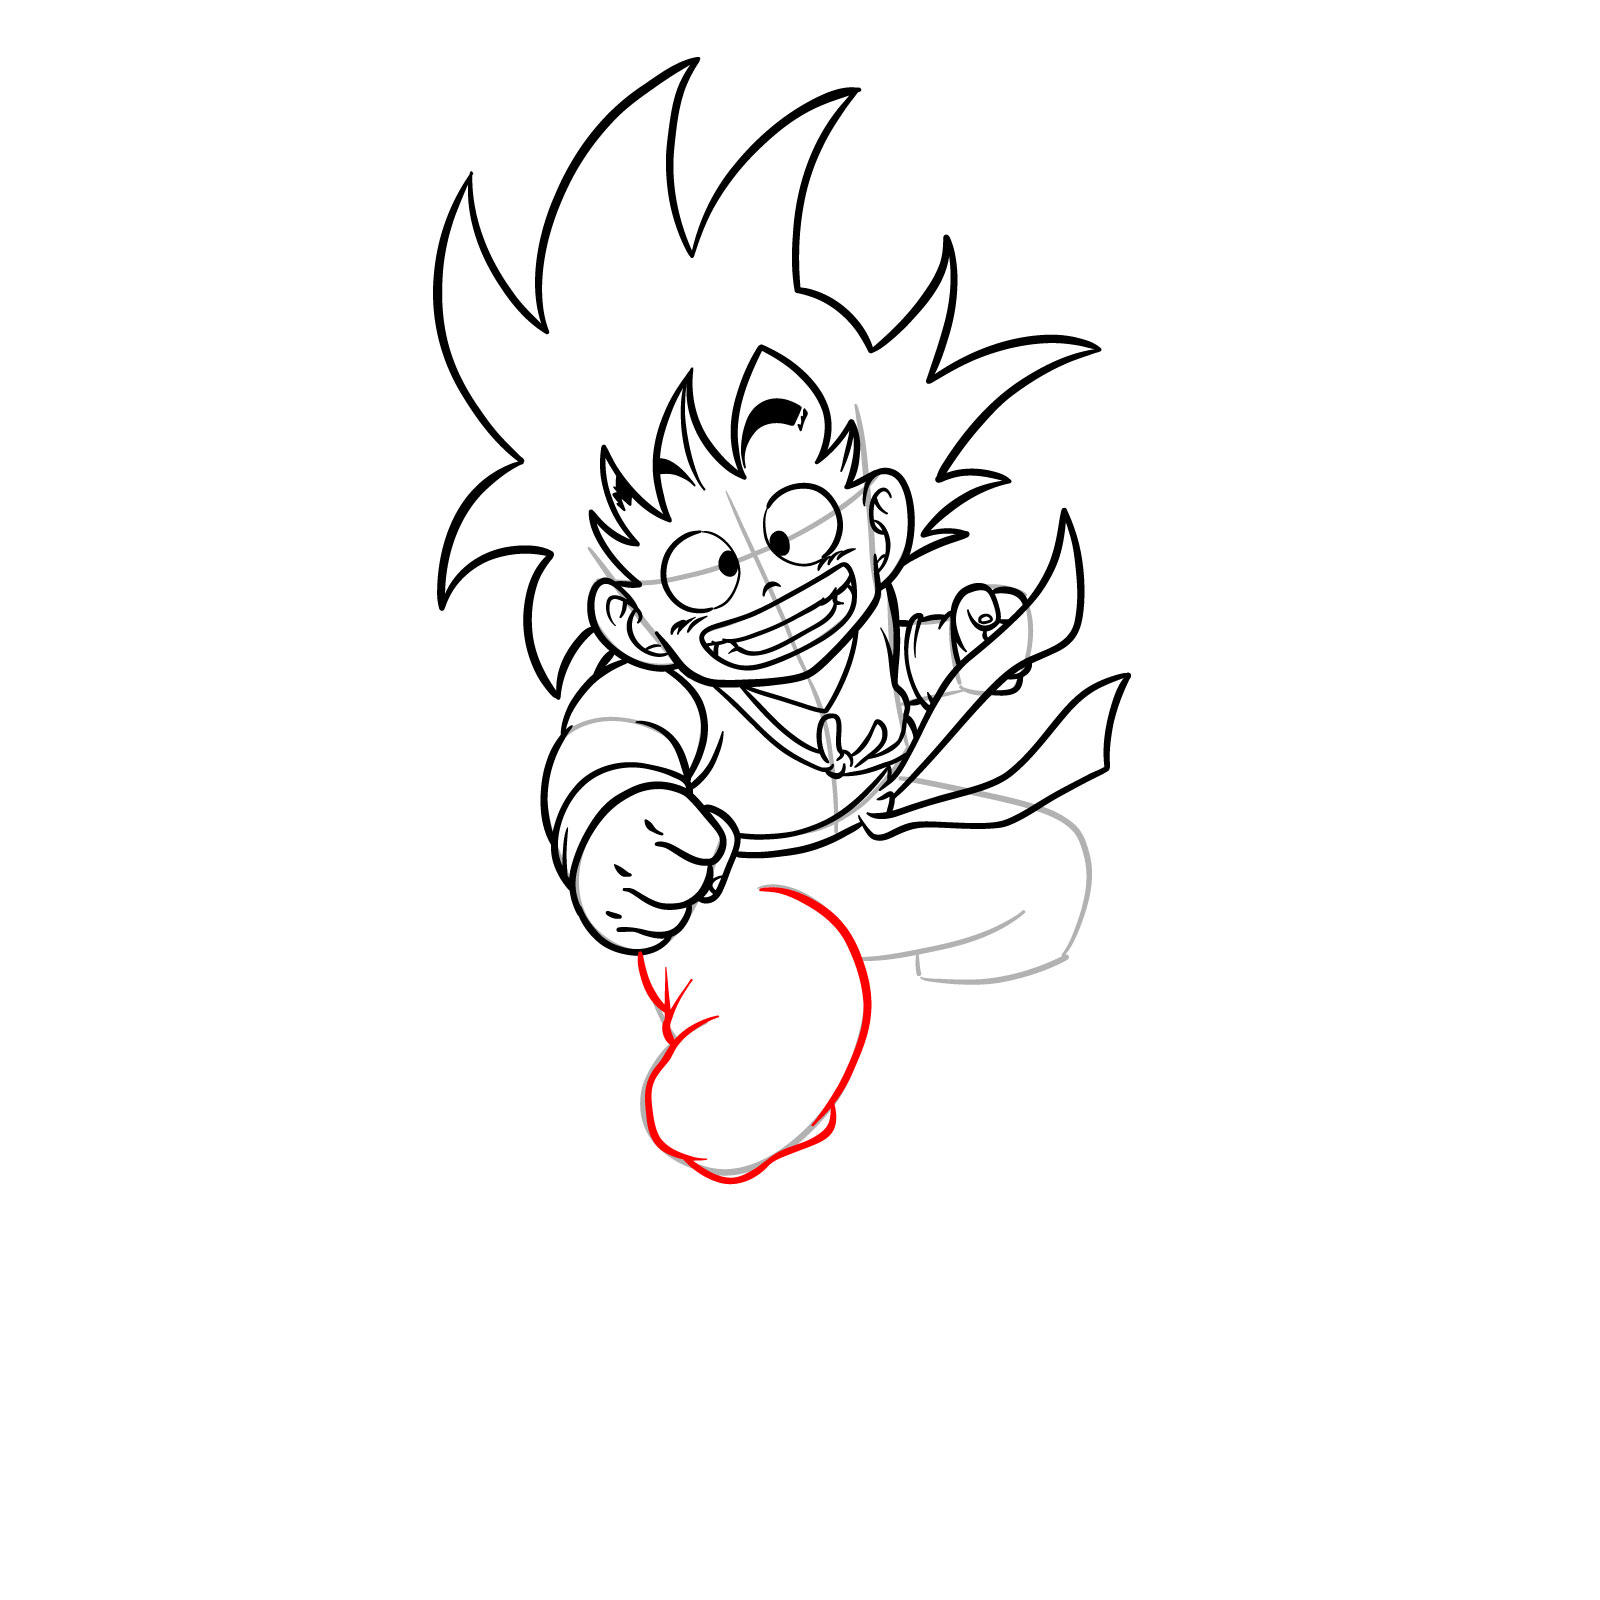 How to draw Kid Goku riding on the Flying Nimbus - step 19